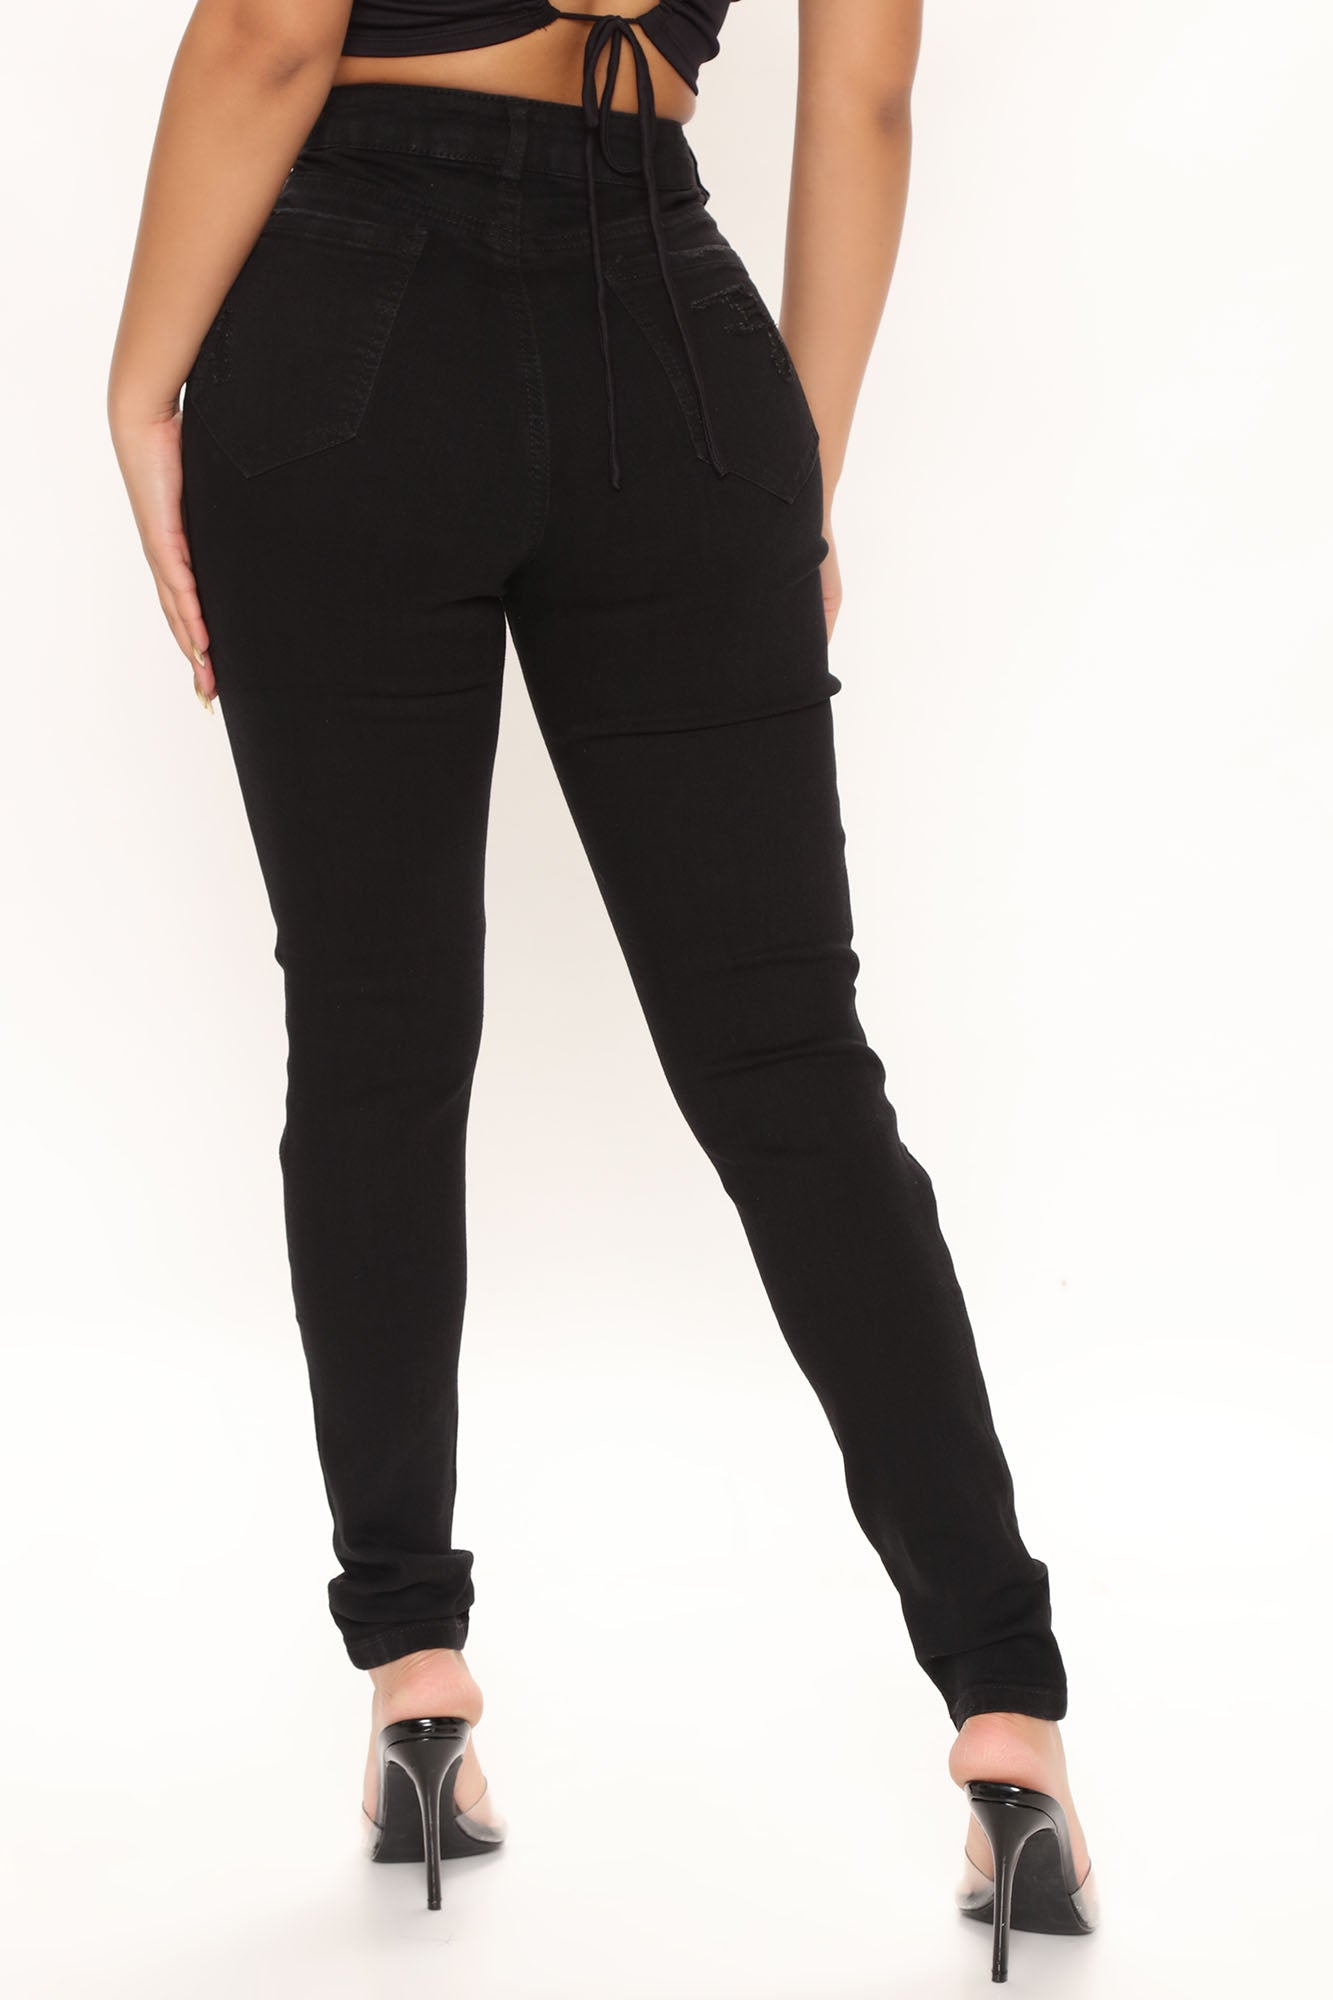 All Wound Up Skinny Jeans - Black